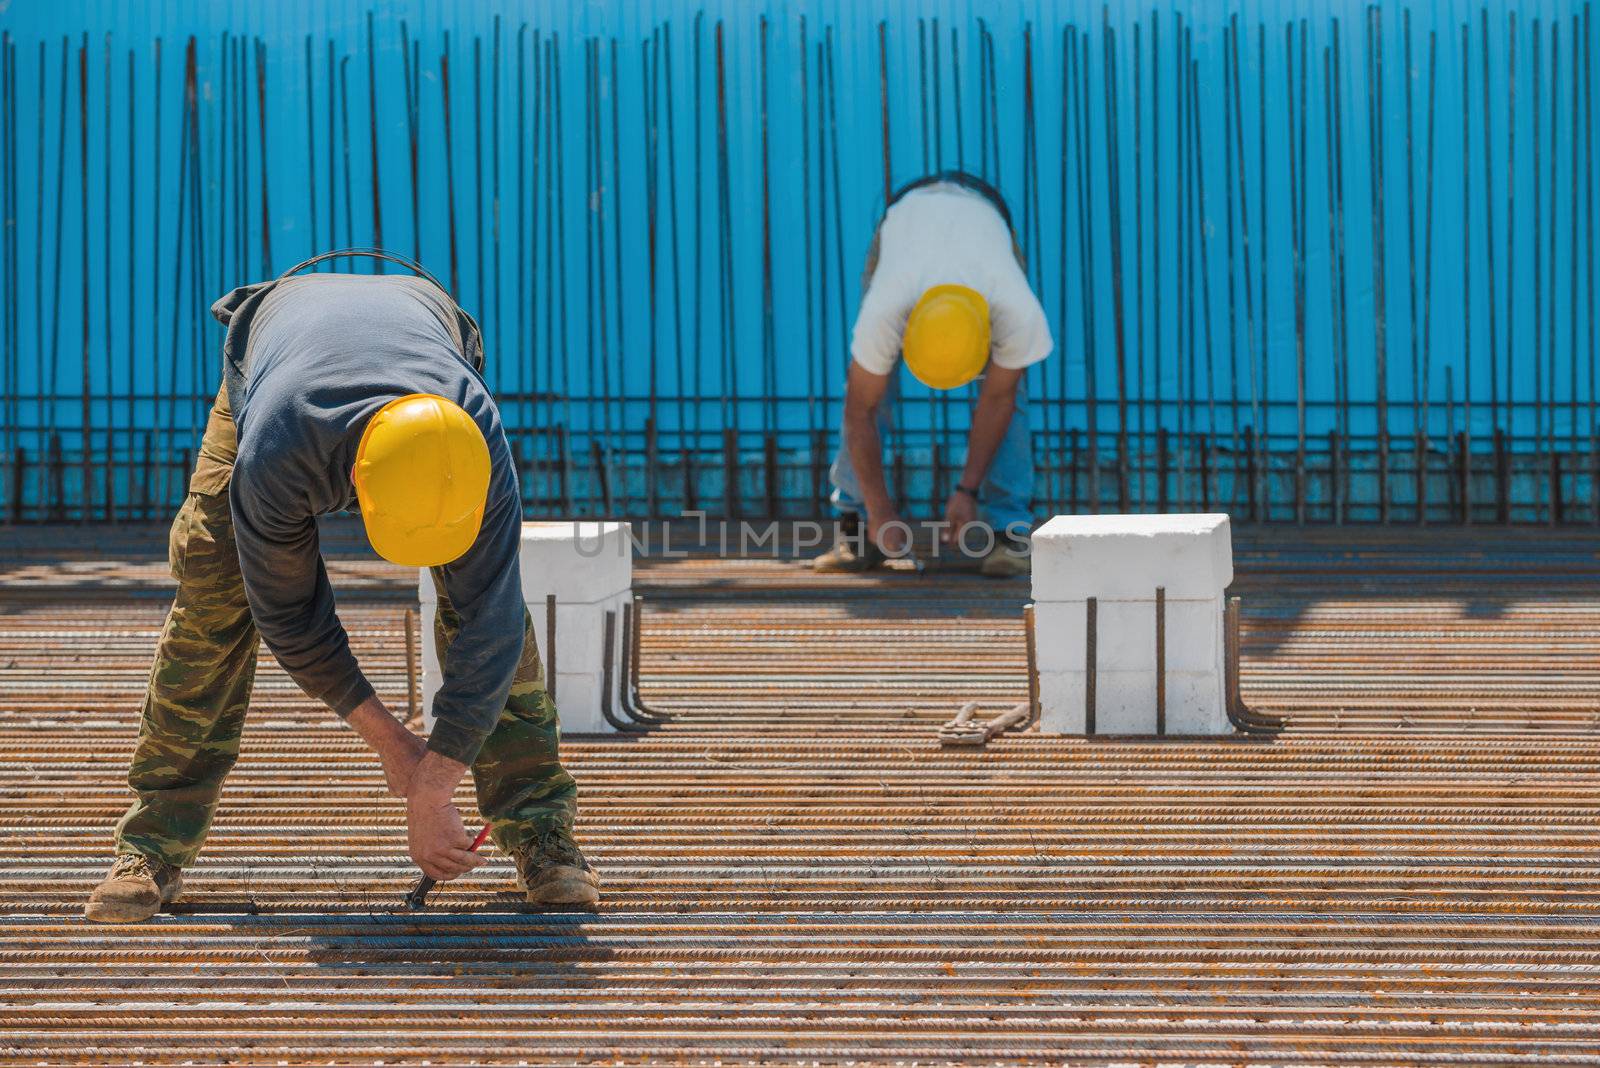 Construction workers installing binding wires to steel bars by akarelias